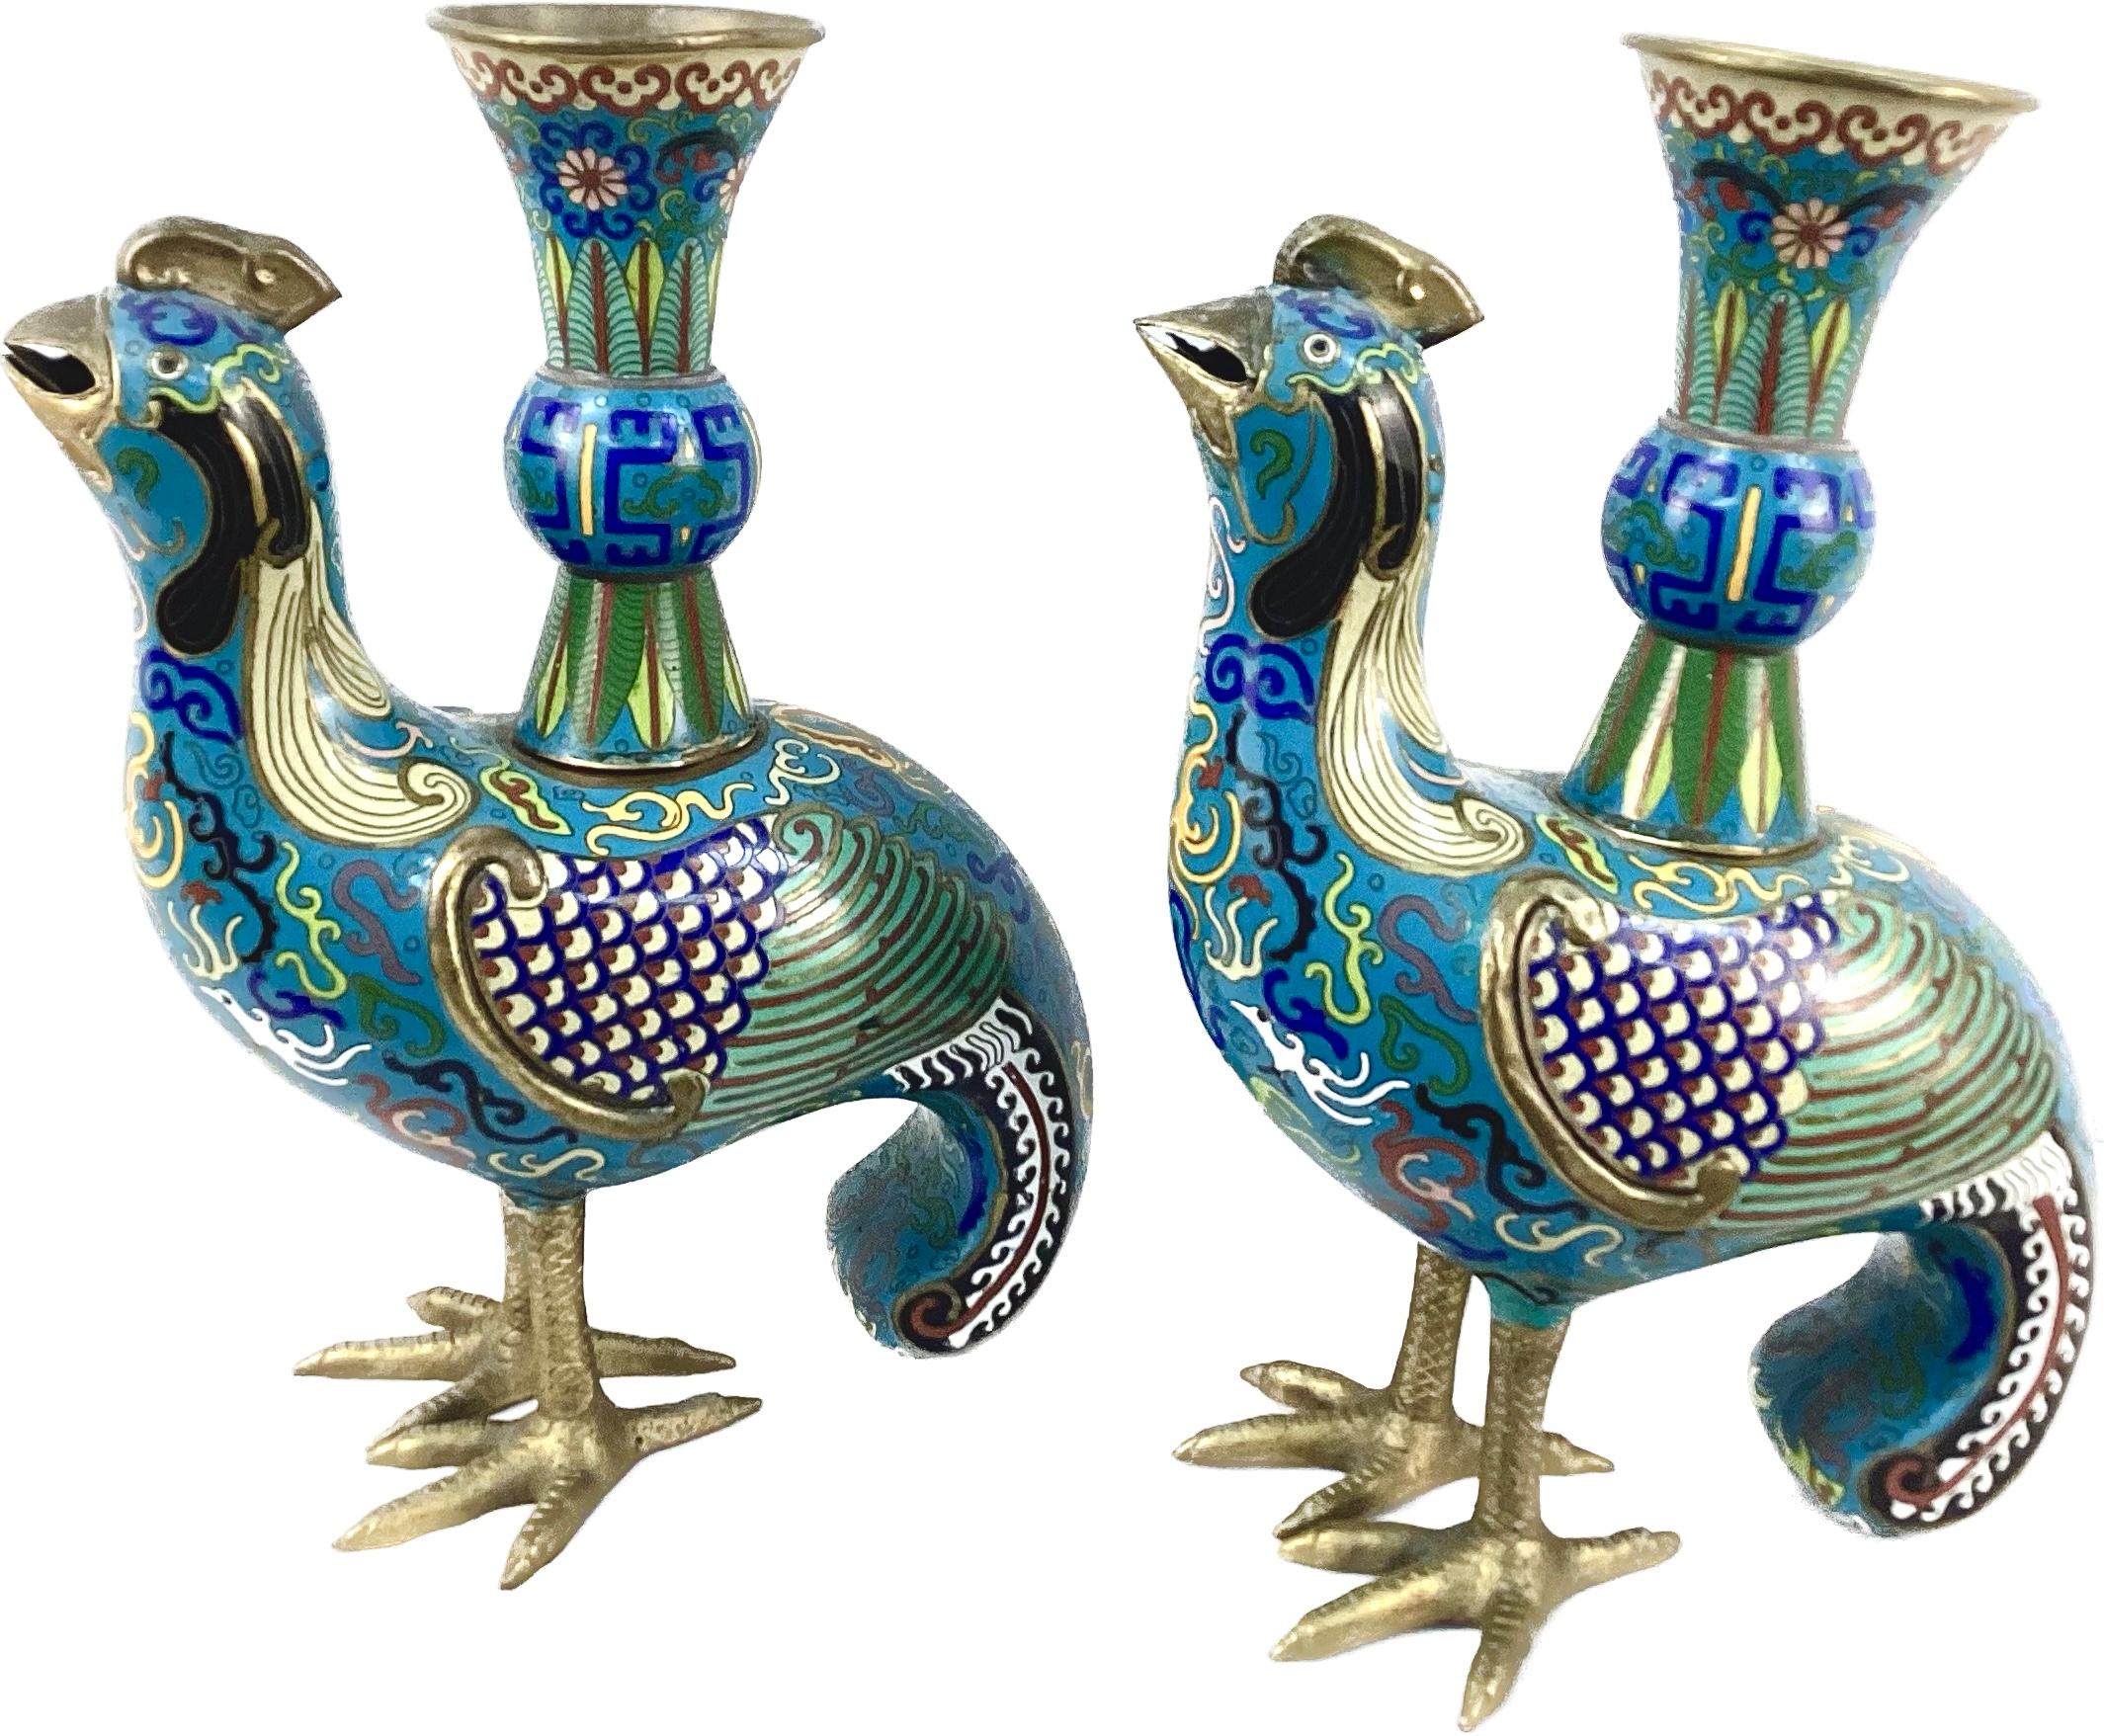 Pair of Cloisonne Archaic Style Birds With Vases For Sale 1